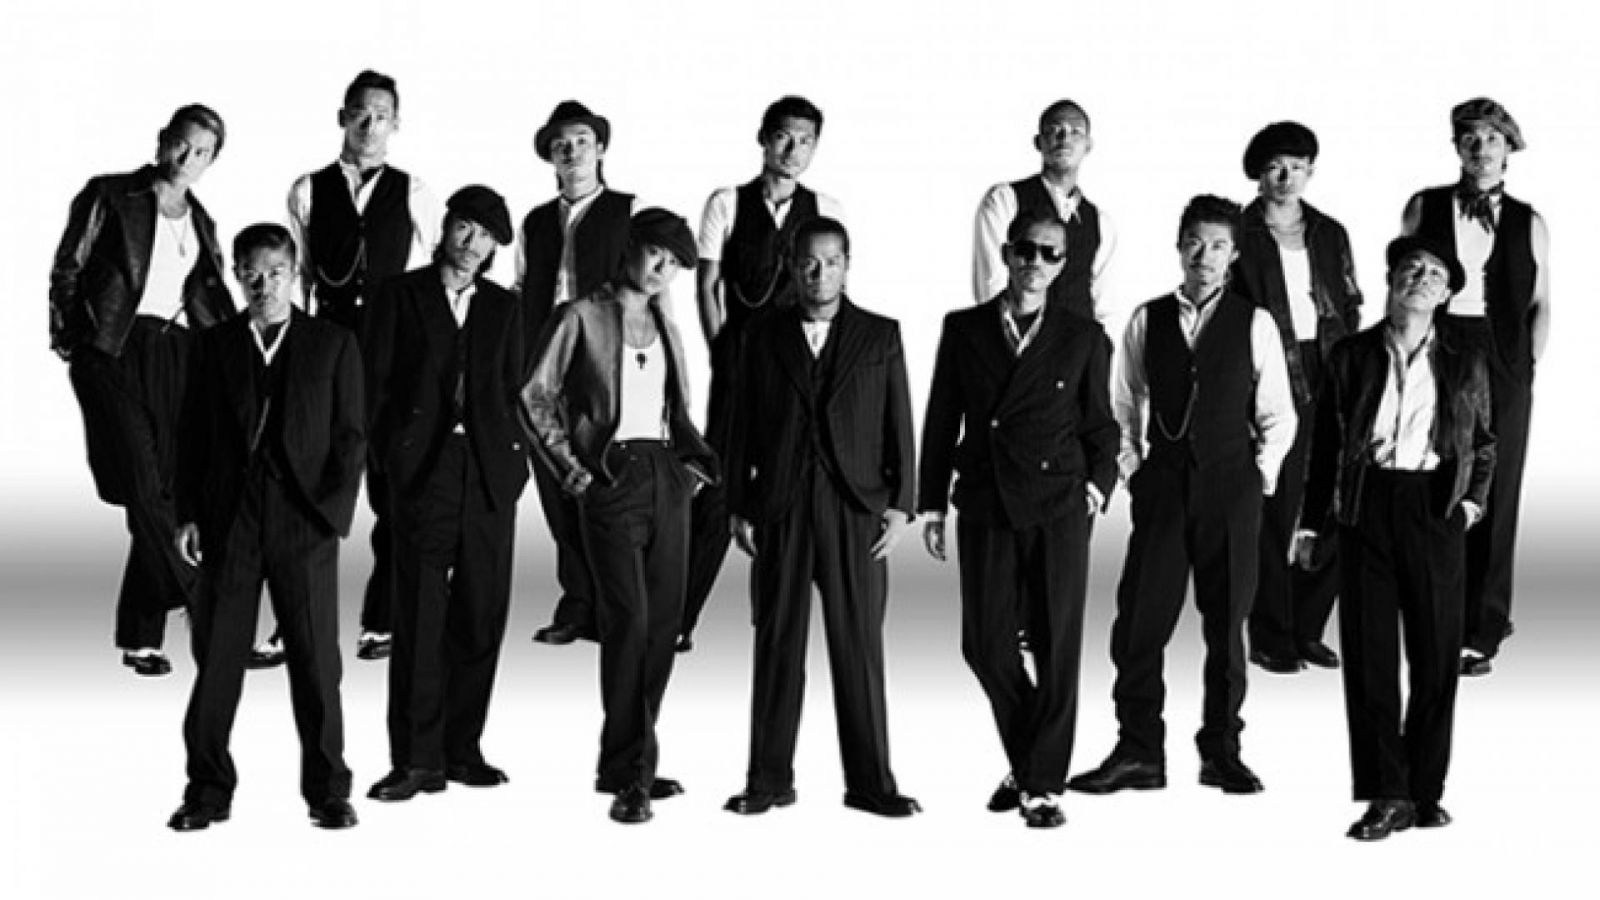 New Album from EXILE with Solo CD by ATSUSHI © Avex Entertainment Inc.